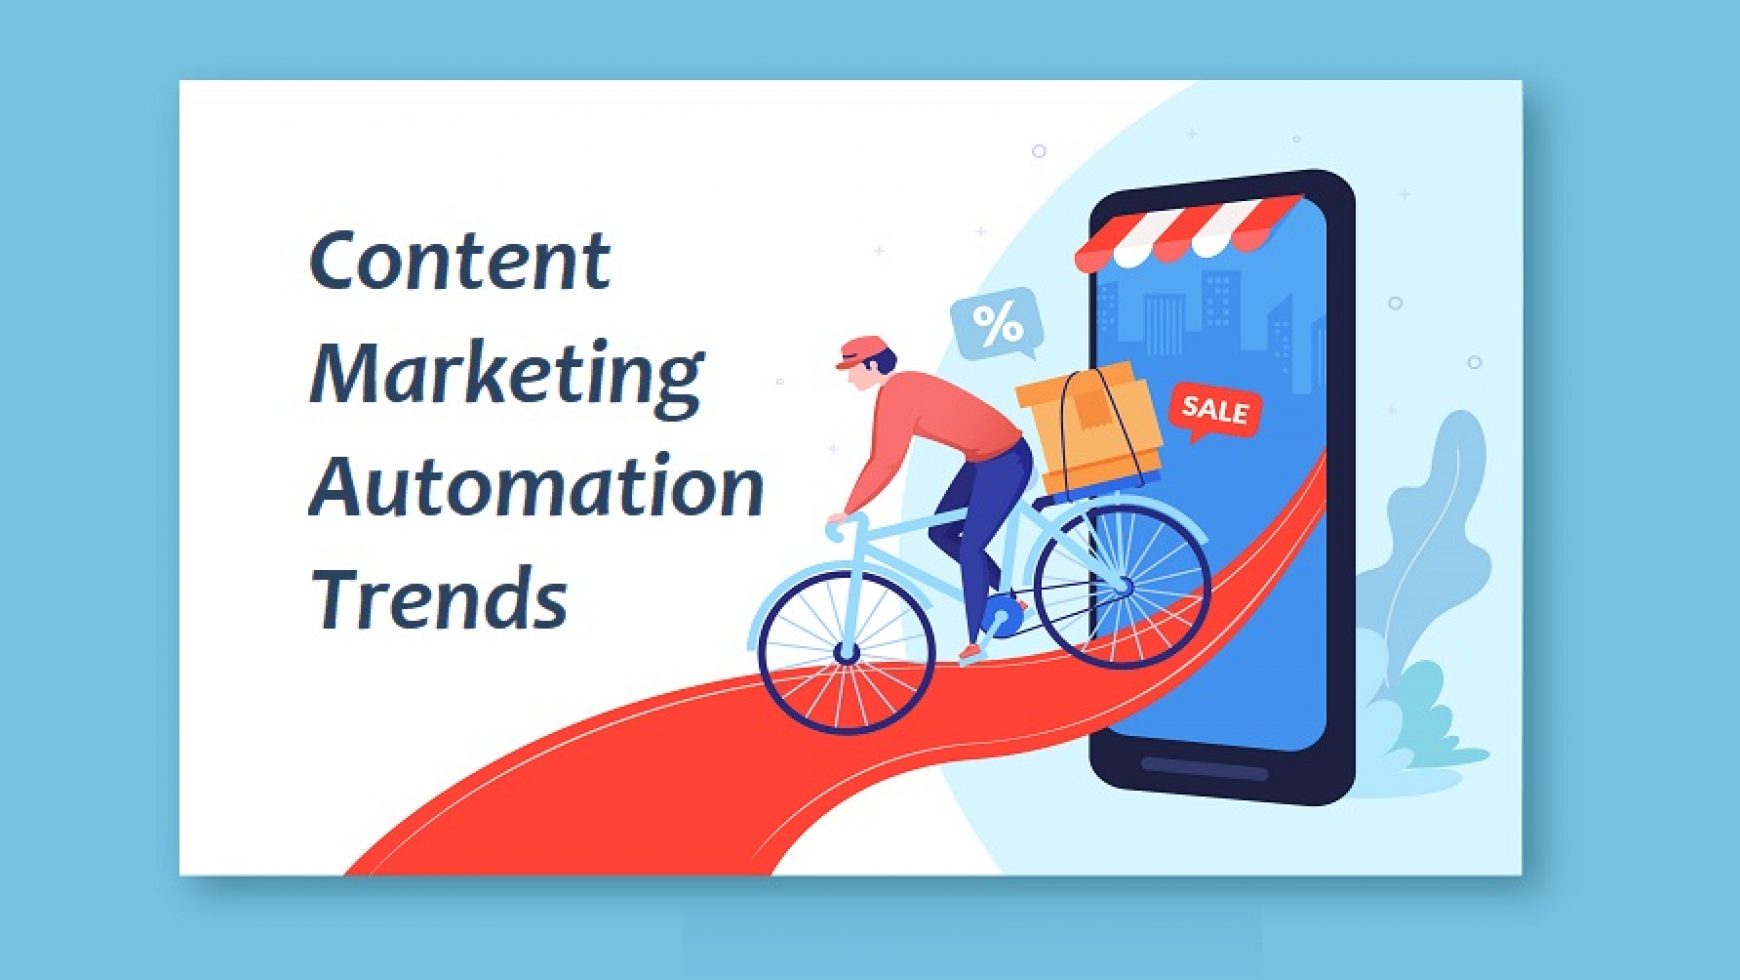 5 Content Marketing Automation Trends That Foster E-Commerce